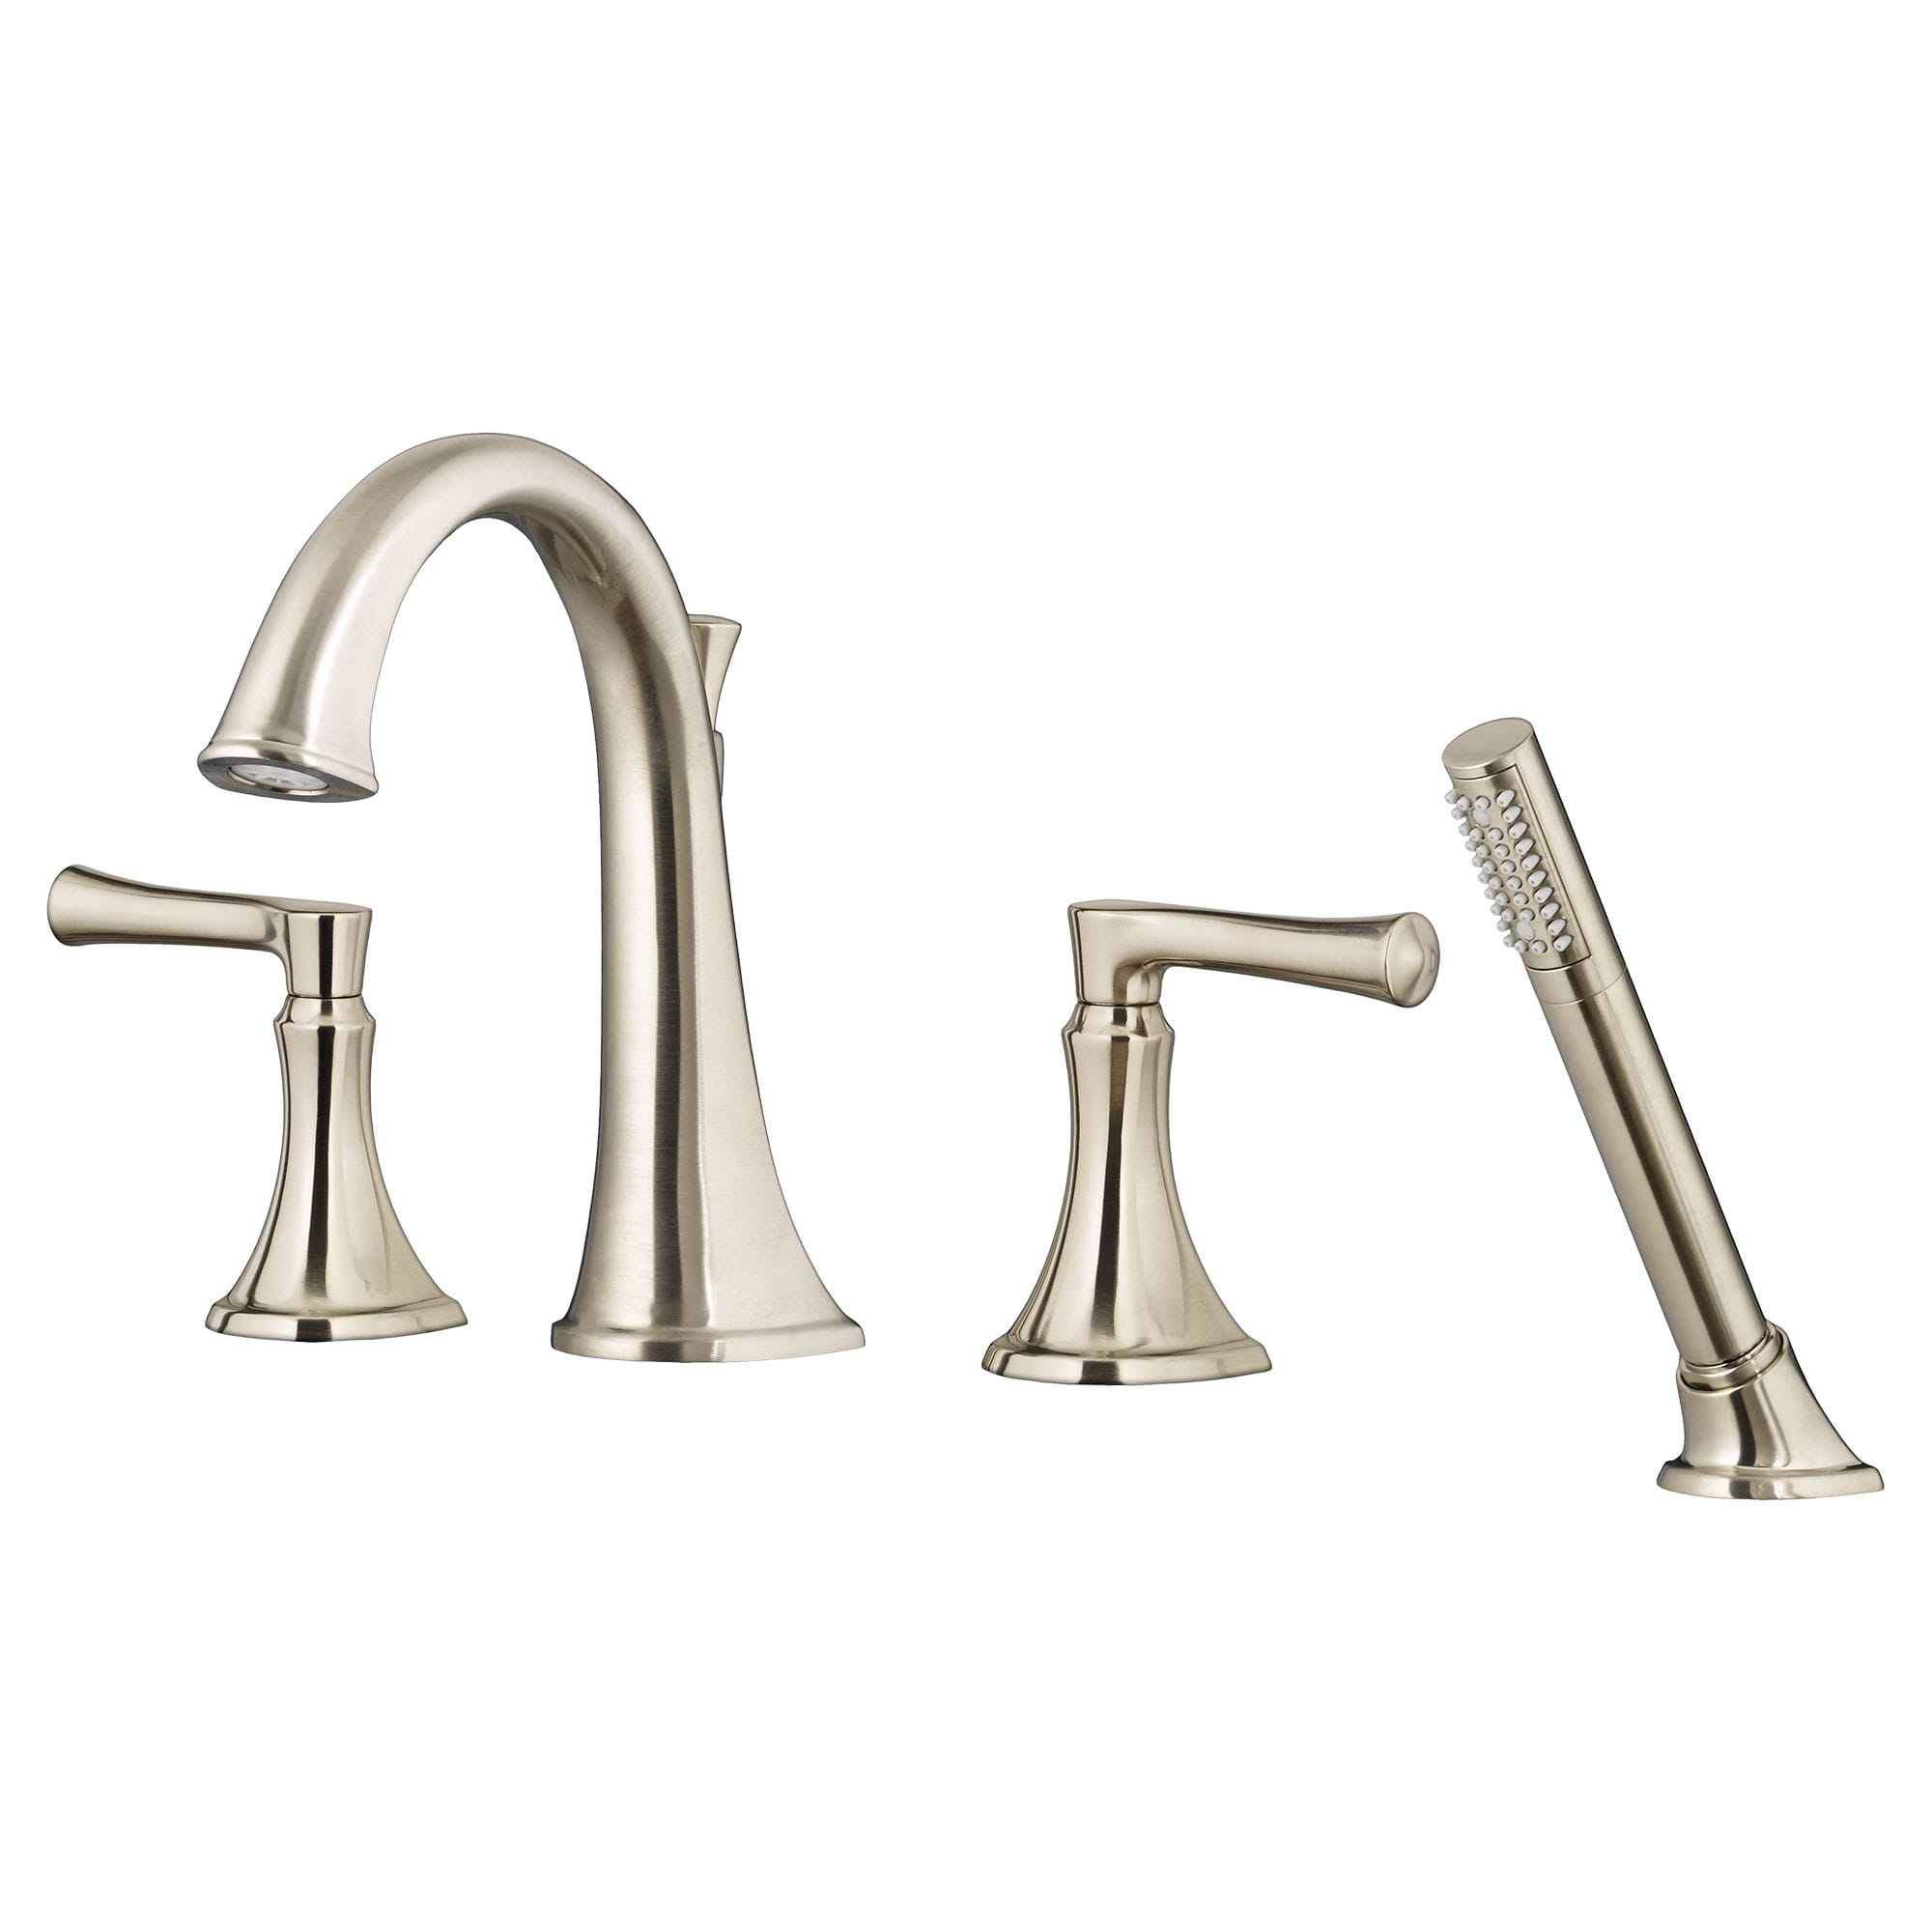 Estate Deck Mount Bathtub Faucet with Personal Shower for Flash Rough in Valve with Lever Handle   BRUSHED NICKEL